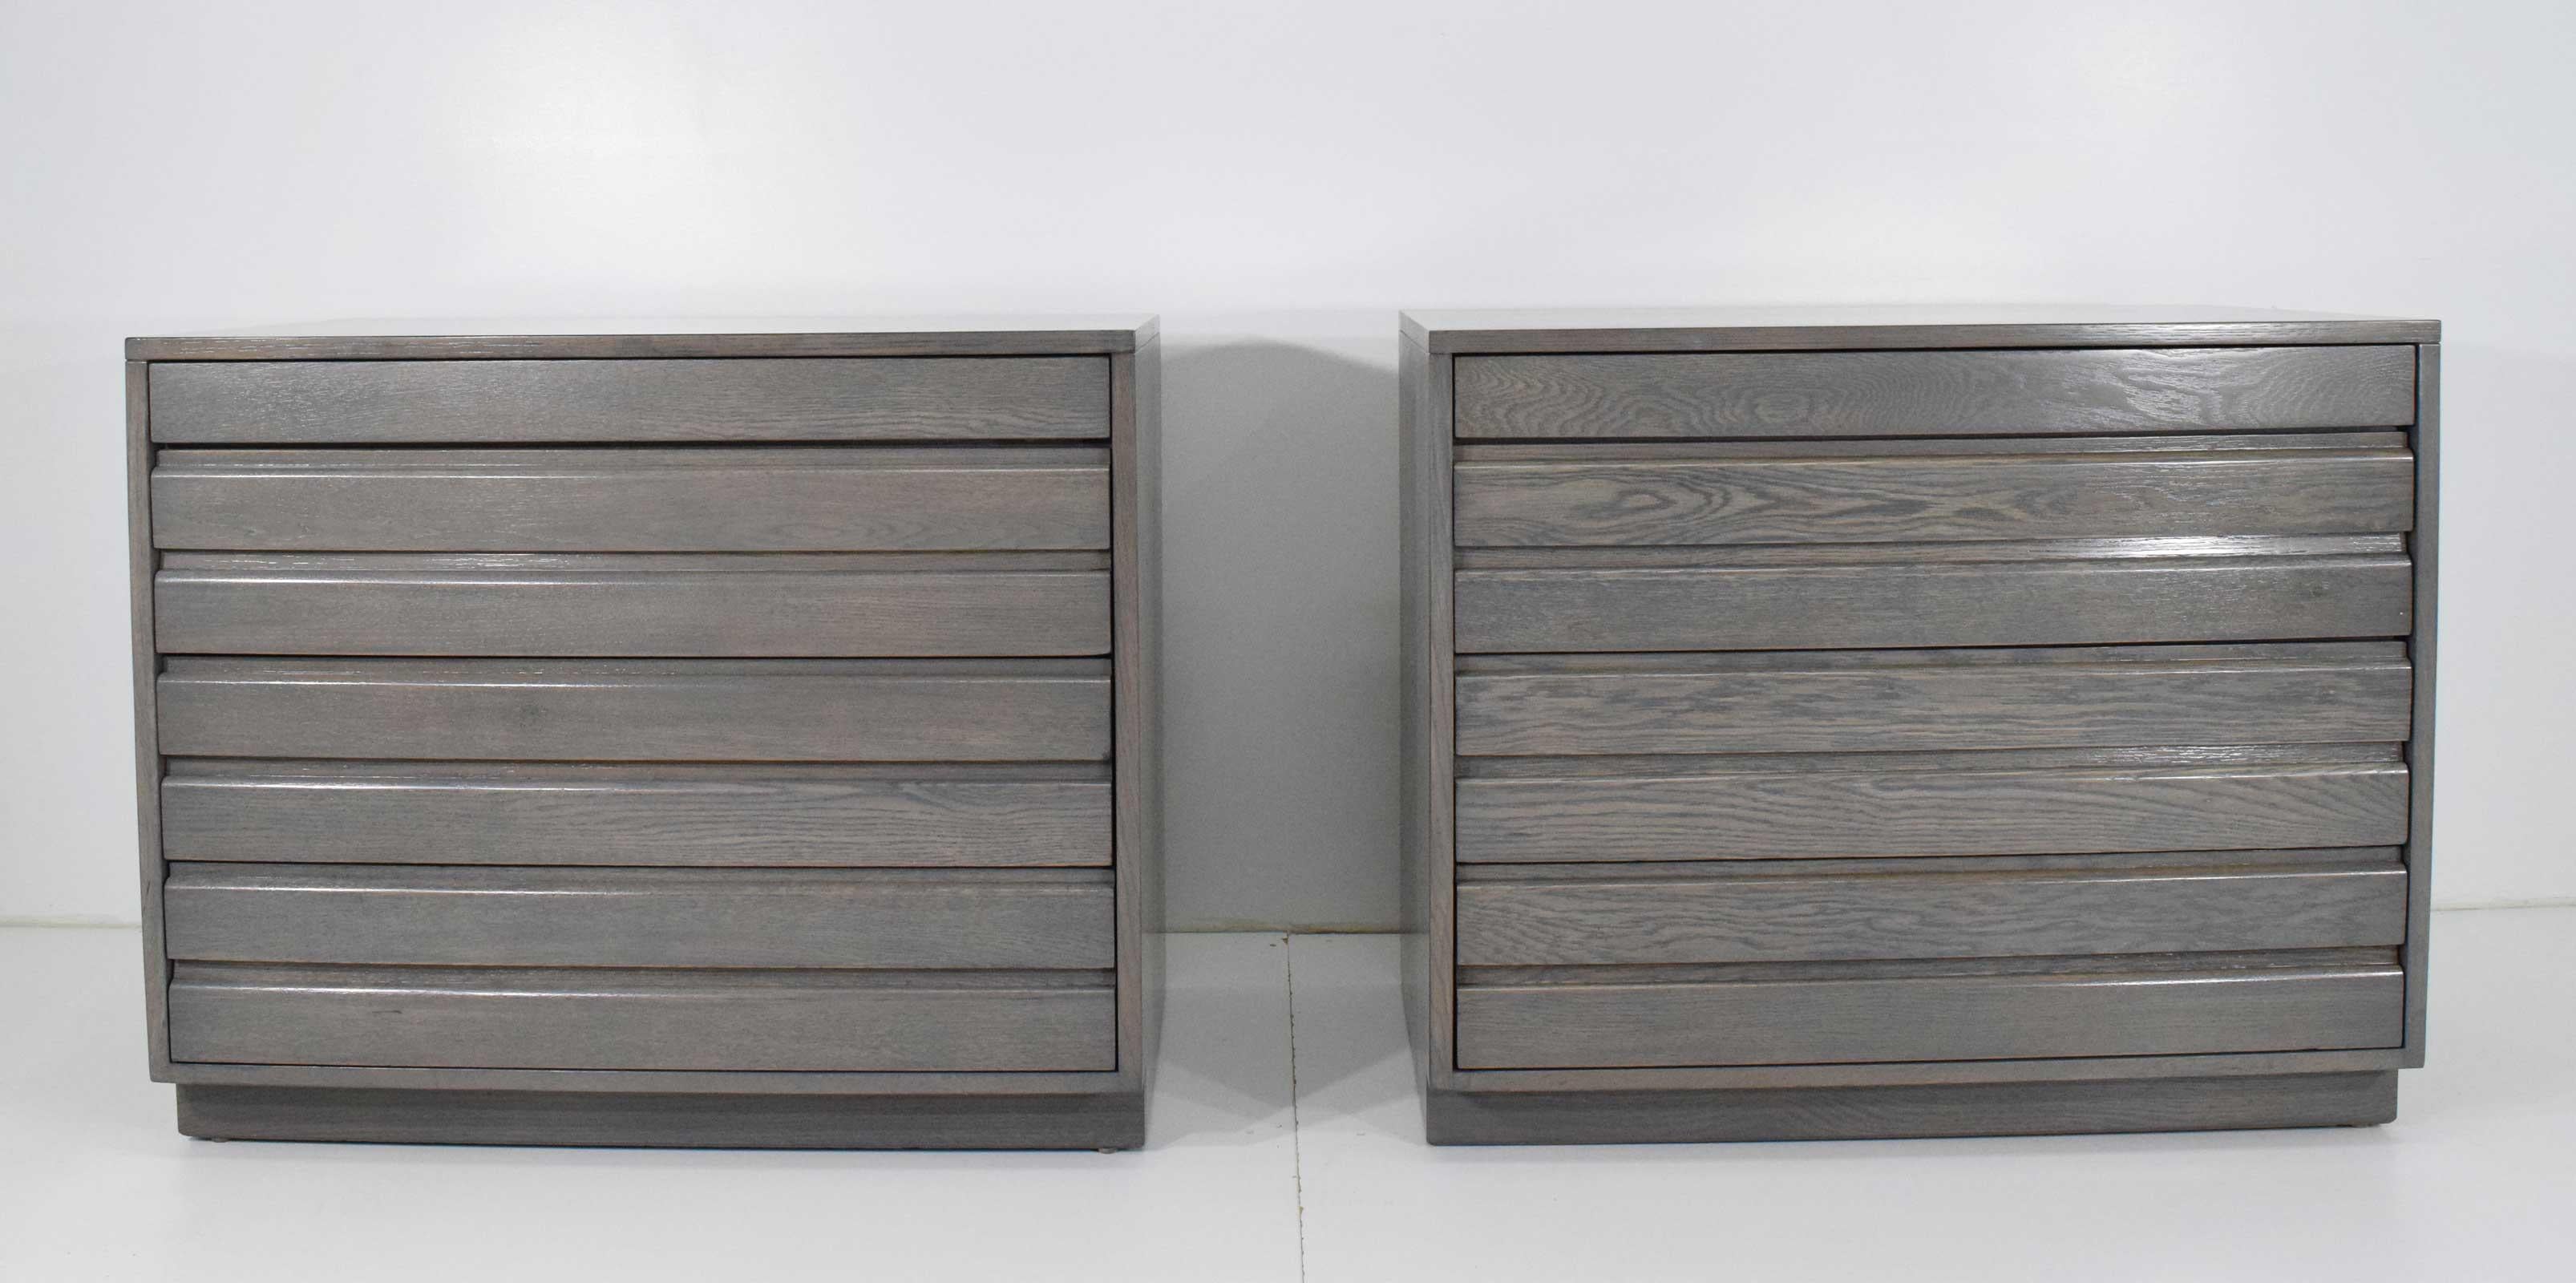 These Sligh chests have been restored and stained in a grey which shows the beautiful graining of the wood. Chests have four drawers each. Great for nightstands or where ever you need two matching chests.